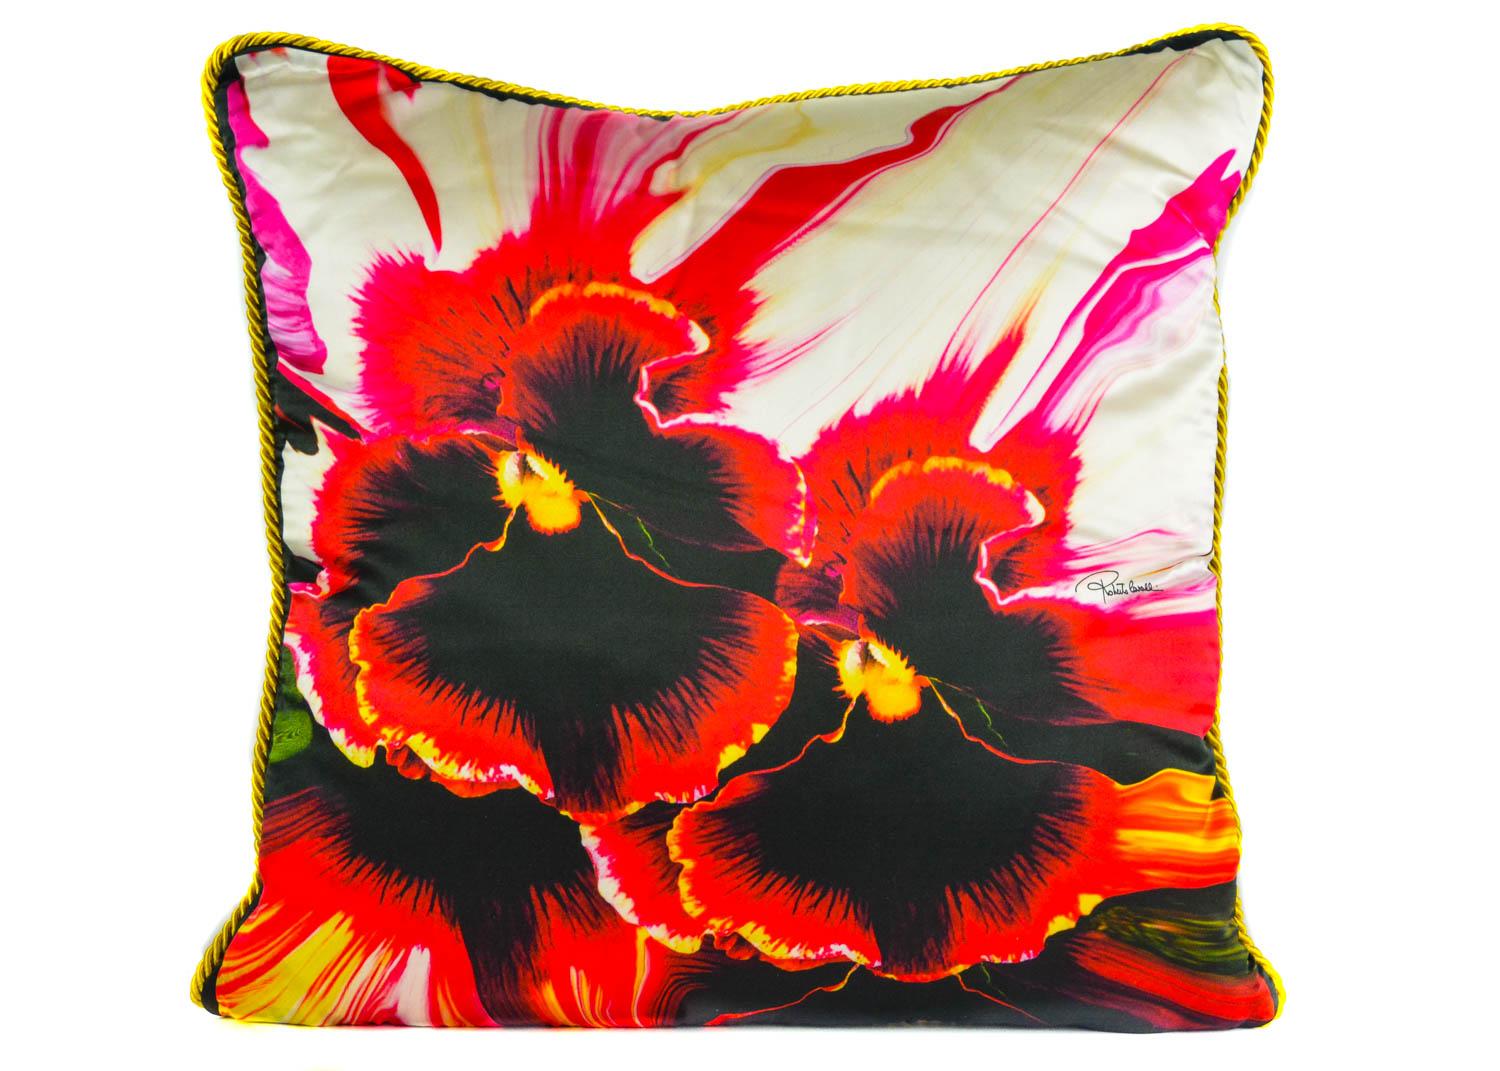 Complete an elegant bedroom with this orchid print cushion from Roberto Cavalli Home. Featuring a double-sided orchid print design with braided trim both side and brand's regal initials. An ideal luxury gift for the fashion conscious, this Roberto